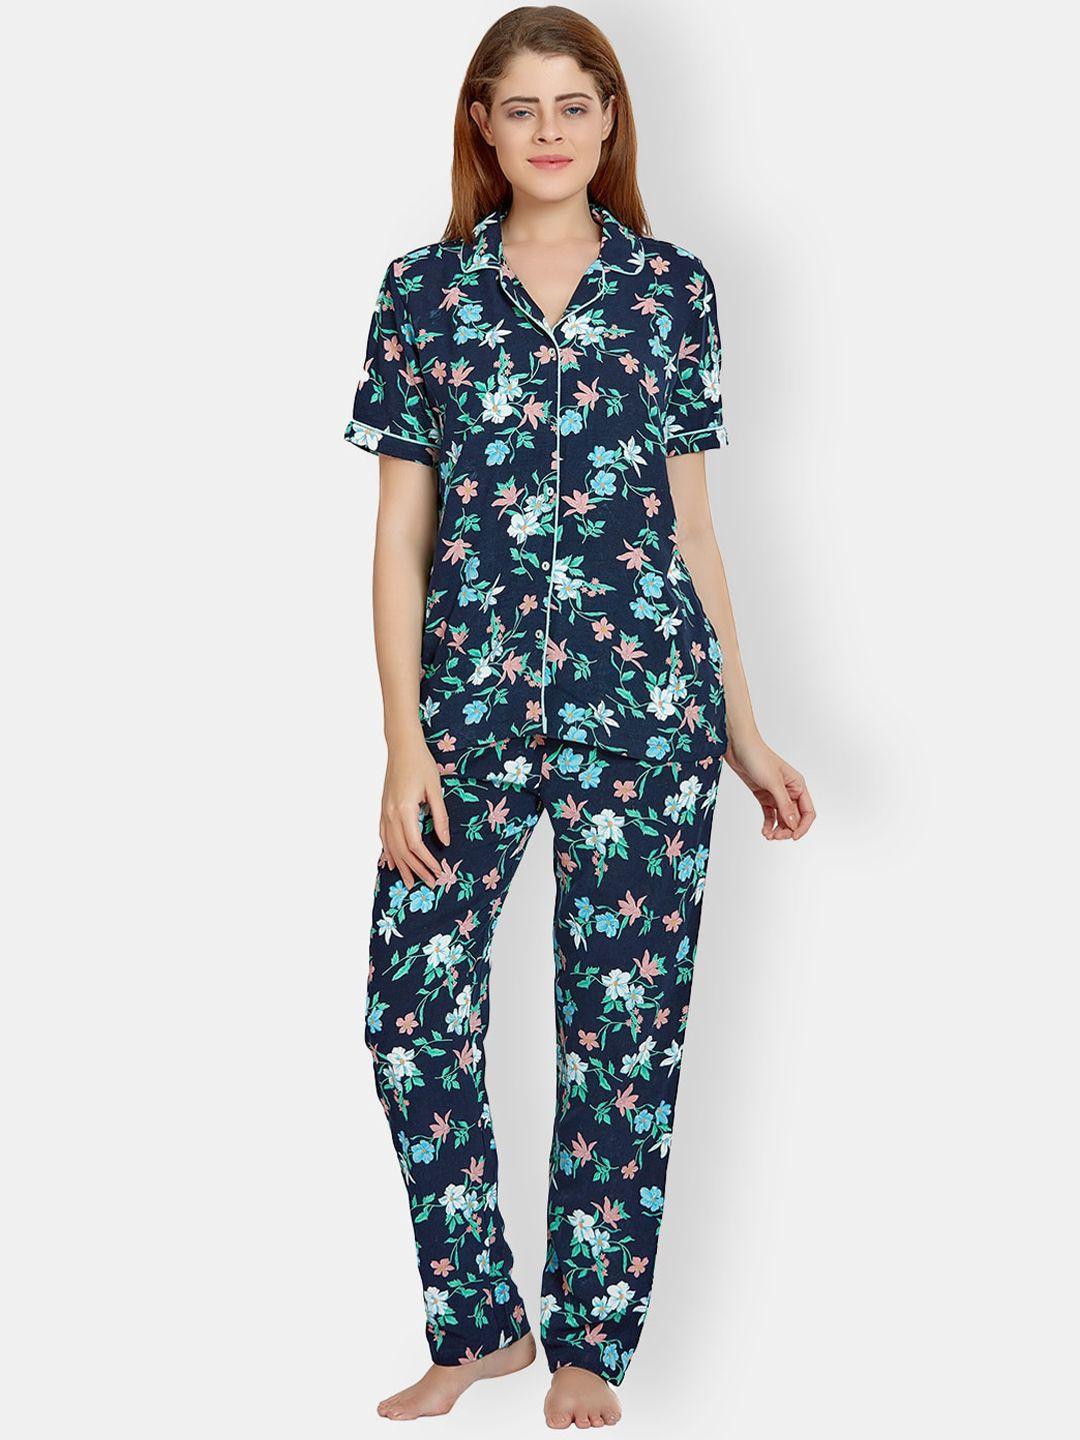 maysixty floral printed pure cotton night suit